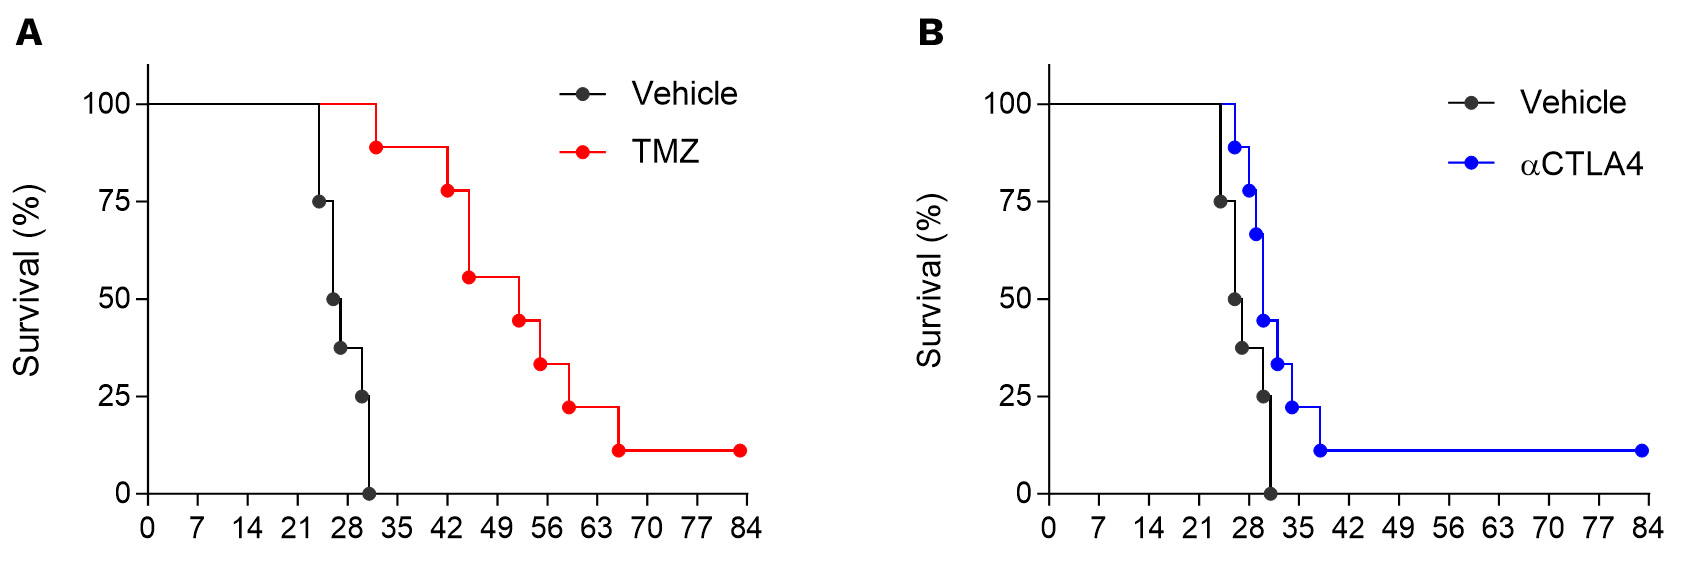 Orthotopic syngeneic GL261 glioblastoma model is strongly responsive to temozolomide (TMZ, A) and moderately to CTLA4 blockade (B).